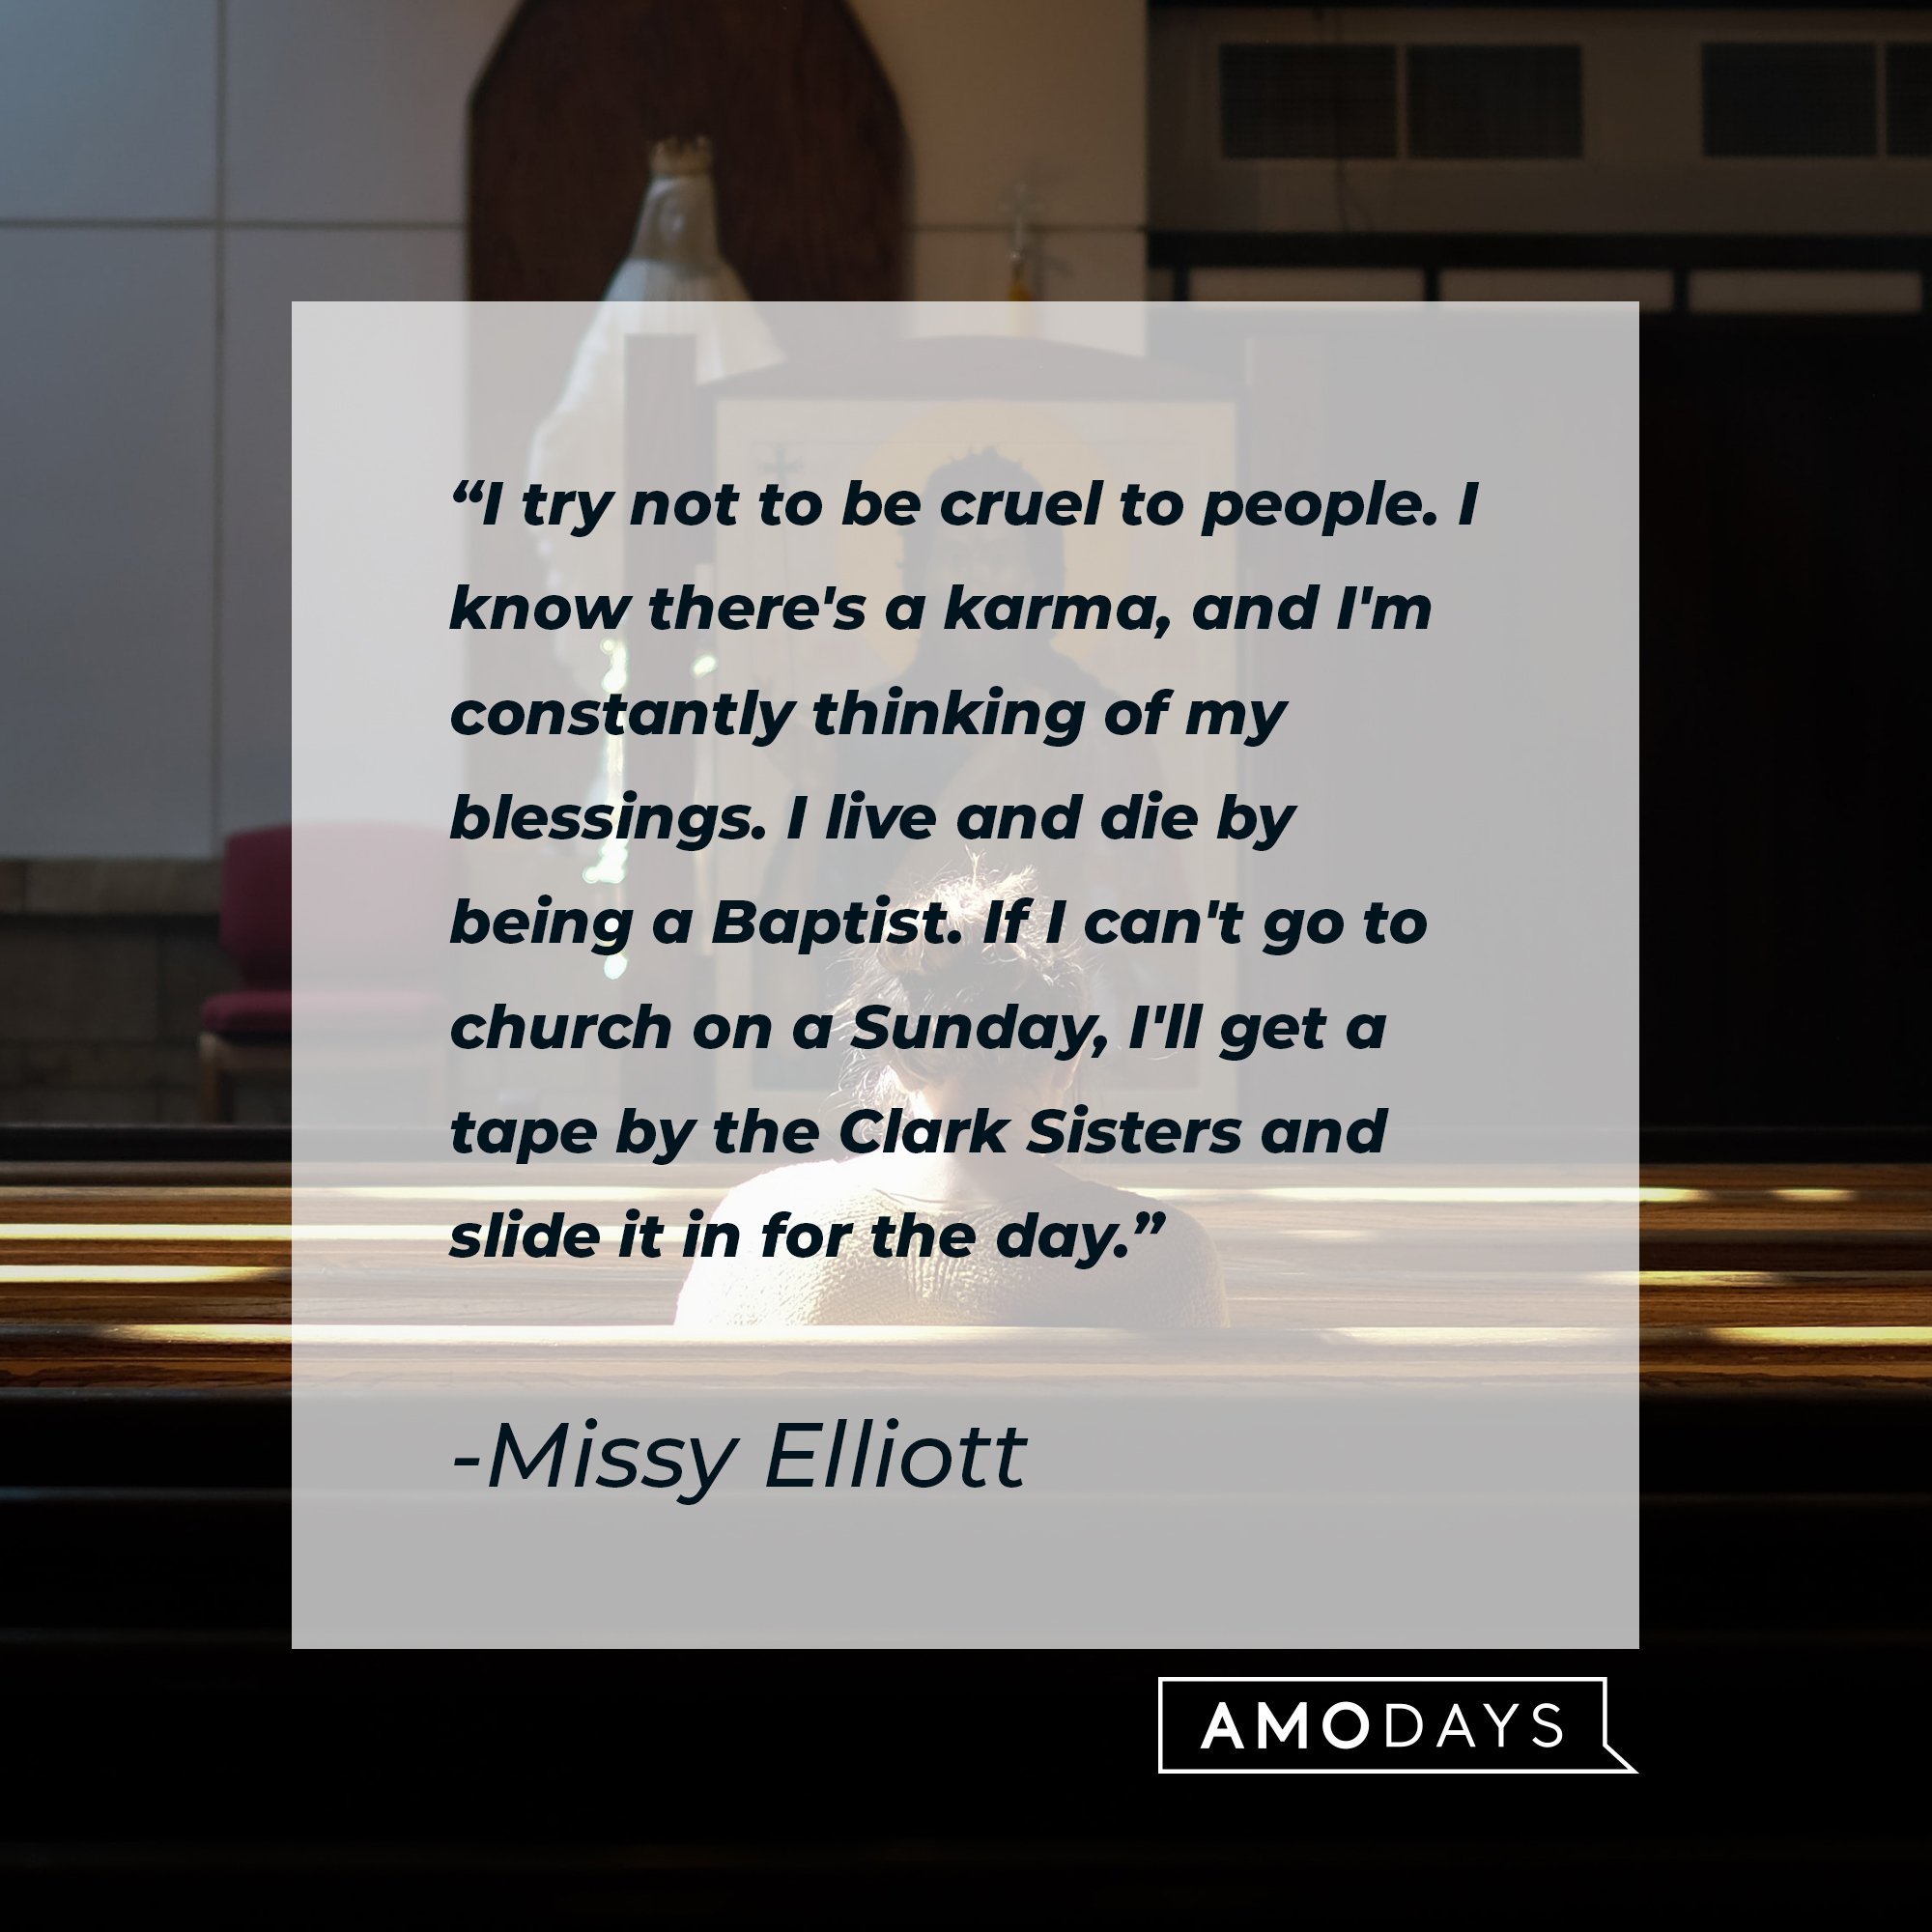 Missy Elliott's quote: “I try not to be cruel to people. I know there's a karma, and I'm constantly thinking of my blessings. I live and die by being a Baptist. If I can't go to church on a Sunday, I'll get a tape by the Clark Sisters and slide it in for the day.” | Image: AmoDays